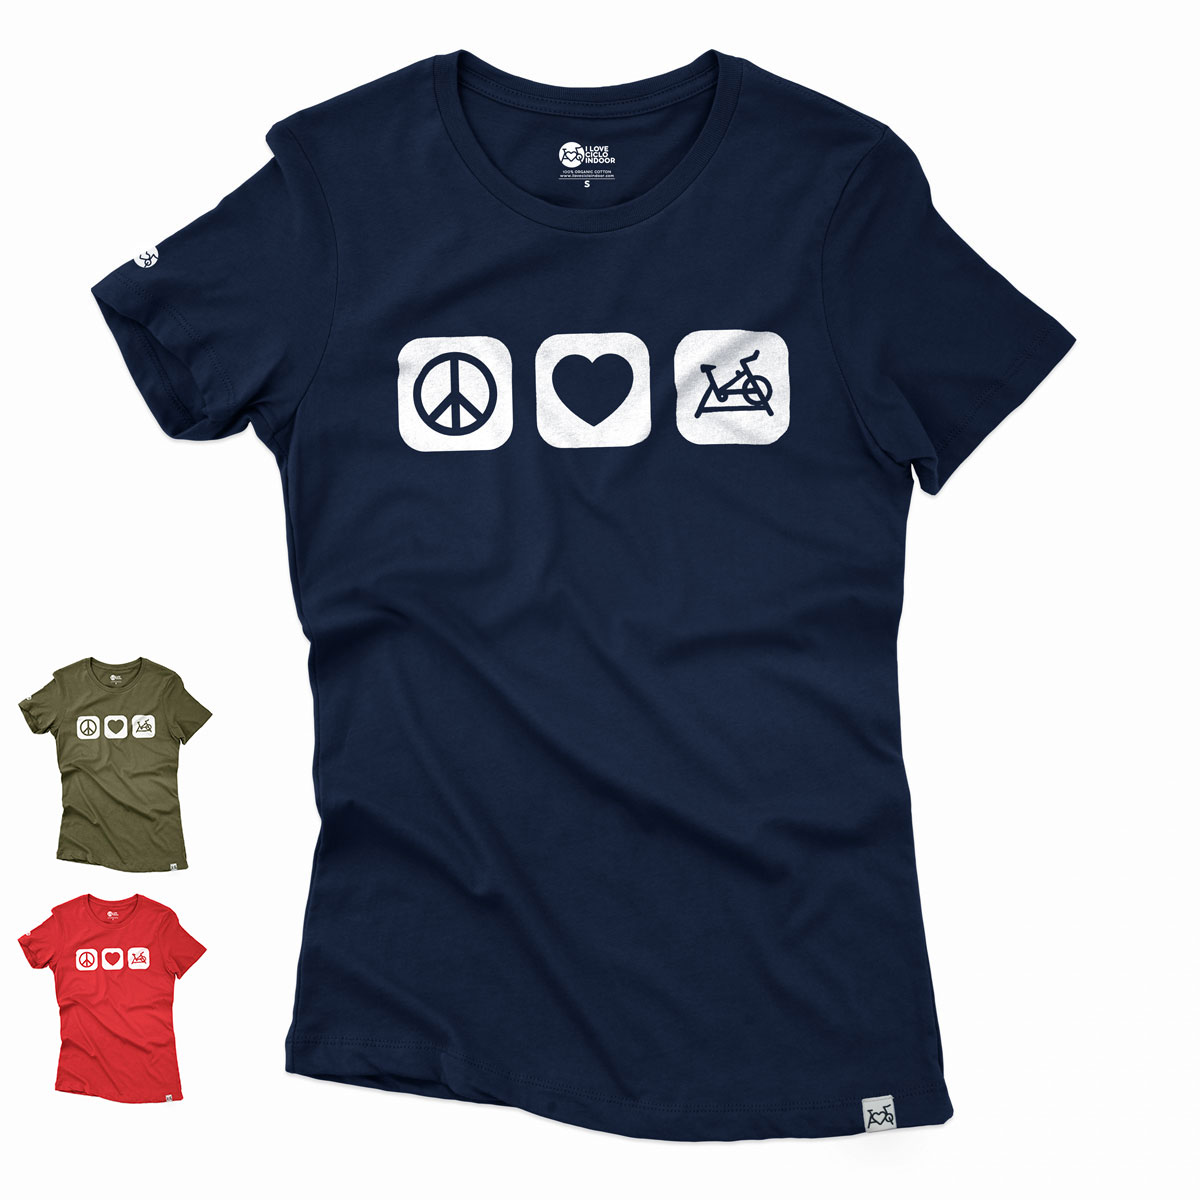 Camiseta mujer PEACE&LOVE by Ciclolover